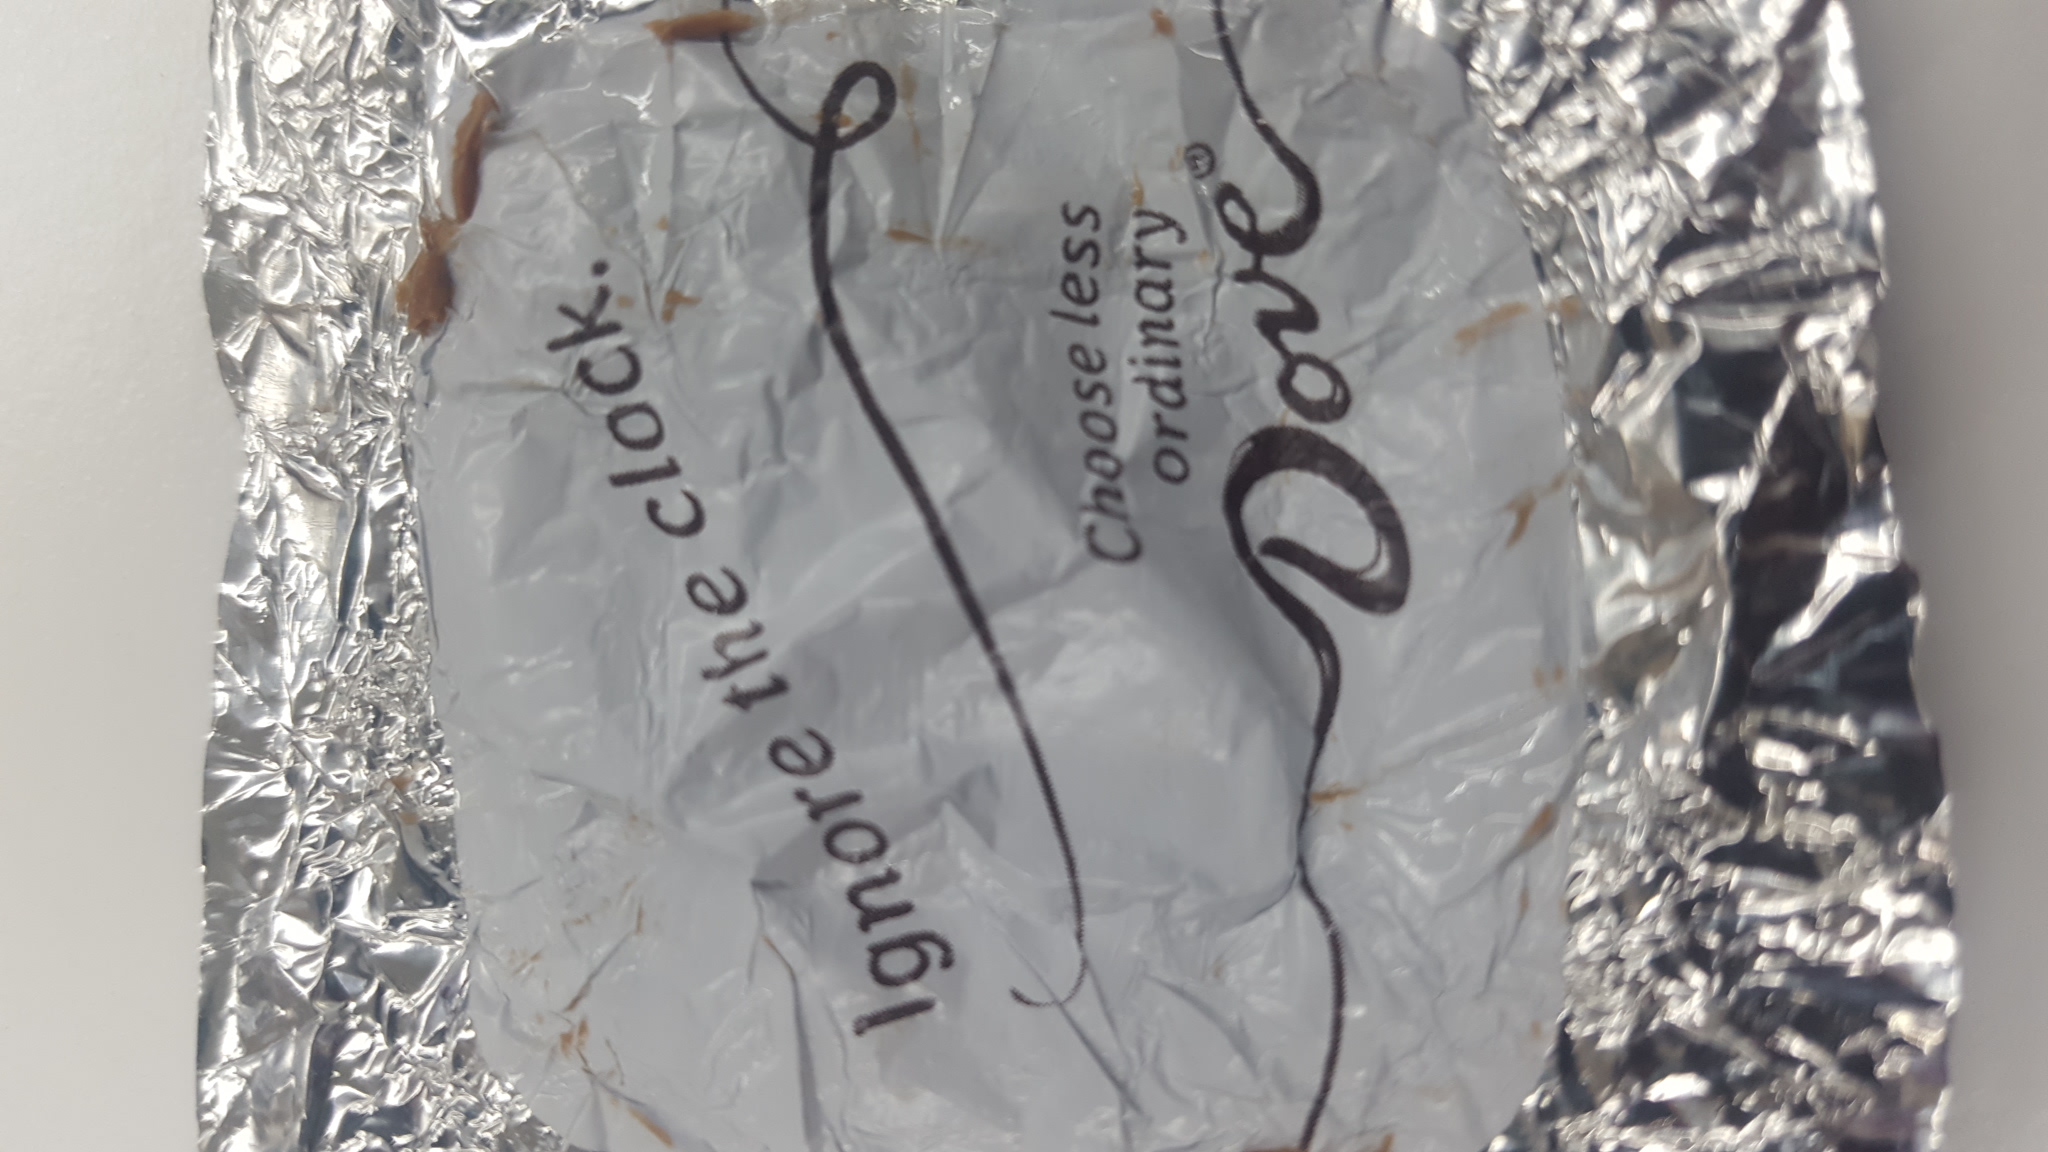 Dove's message for me and you.